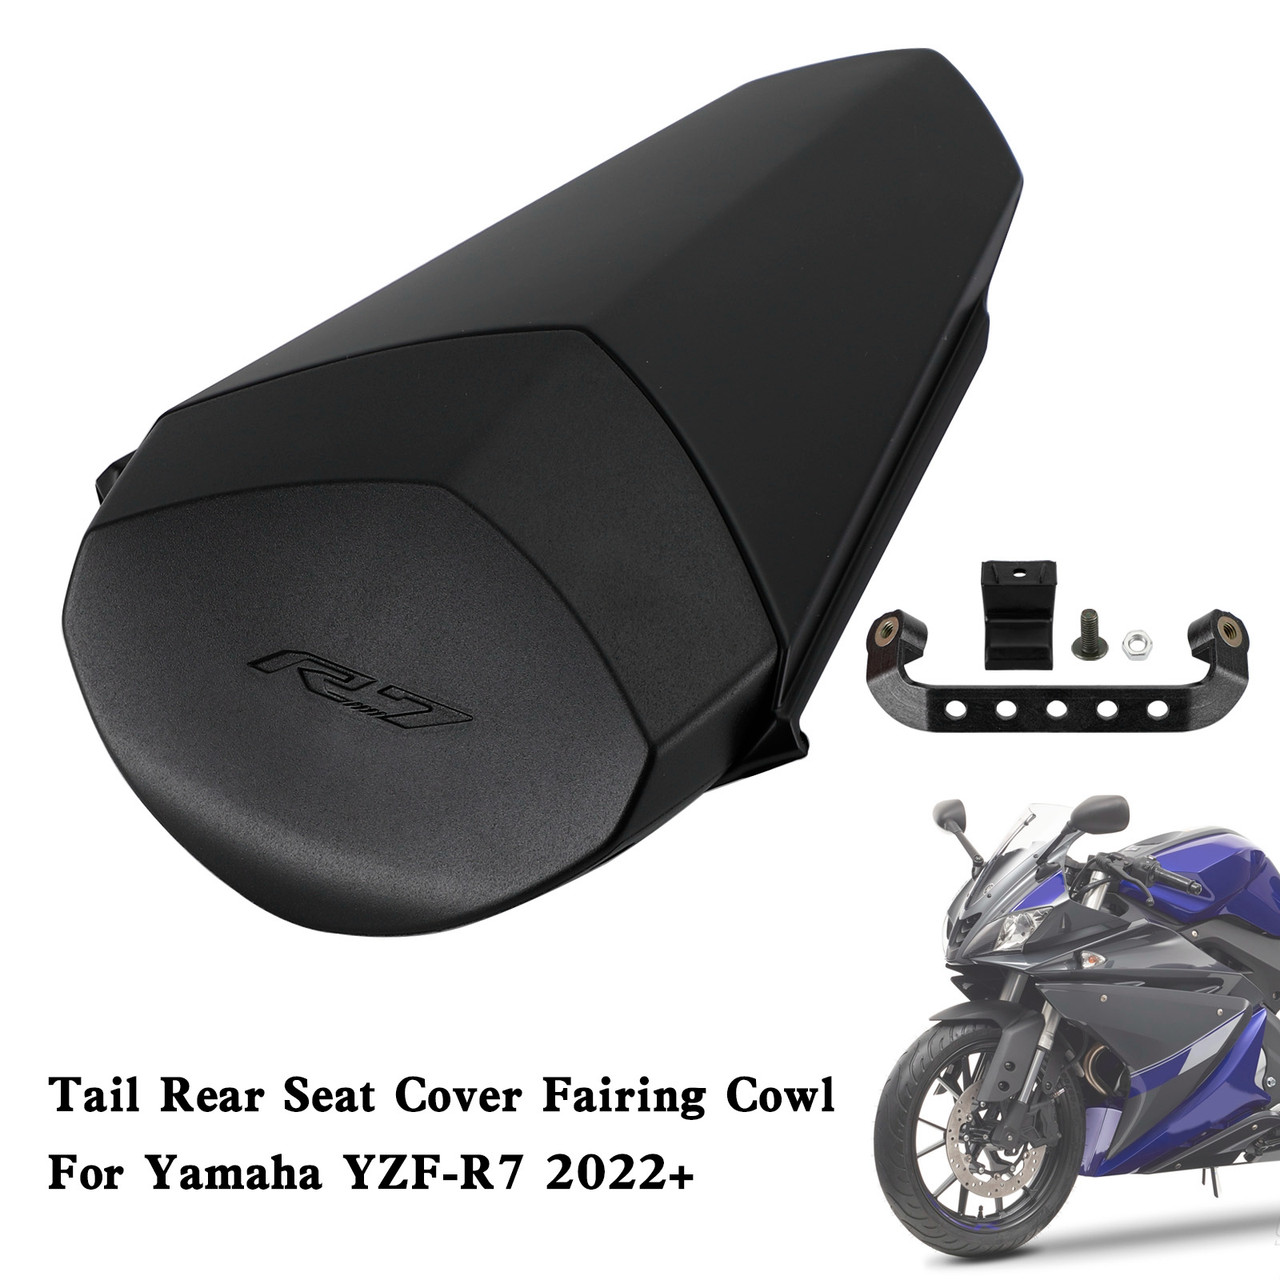 Tail Rear Seat Cover Fairing Cowl For YAMAHA YZF-R7 YZF R7 2022-2023 MBLKLK